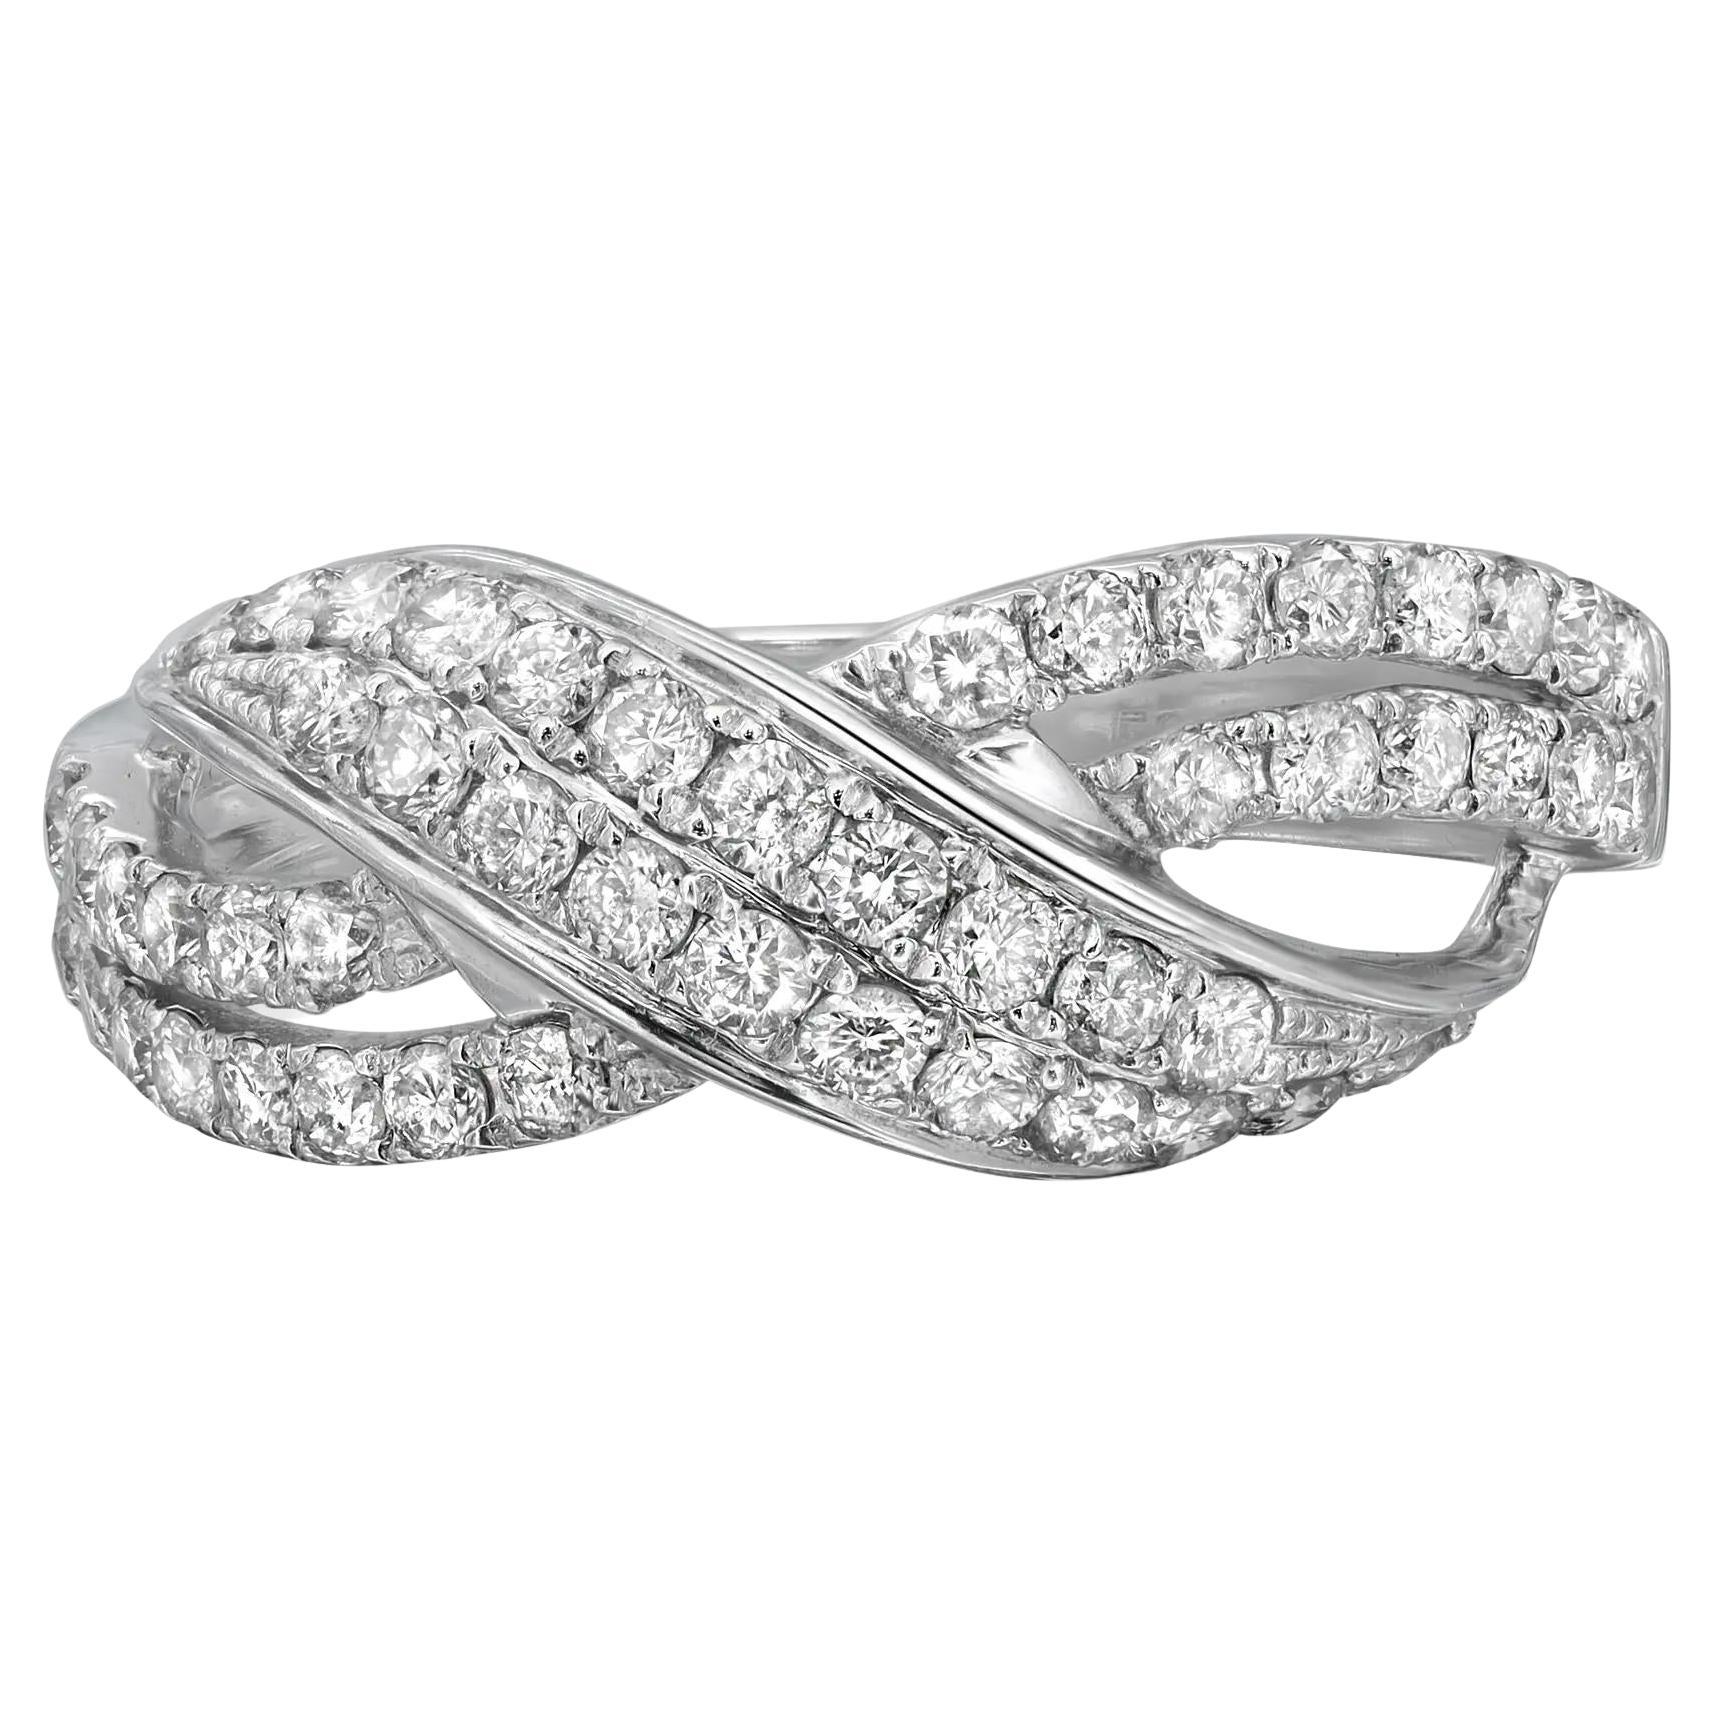 0.88cttw Prong Set Round Cut Diamond Ladies Ring 14k White Gold For Sale